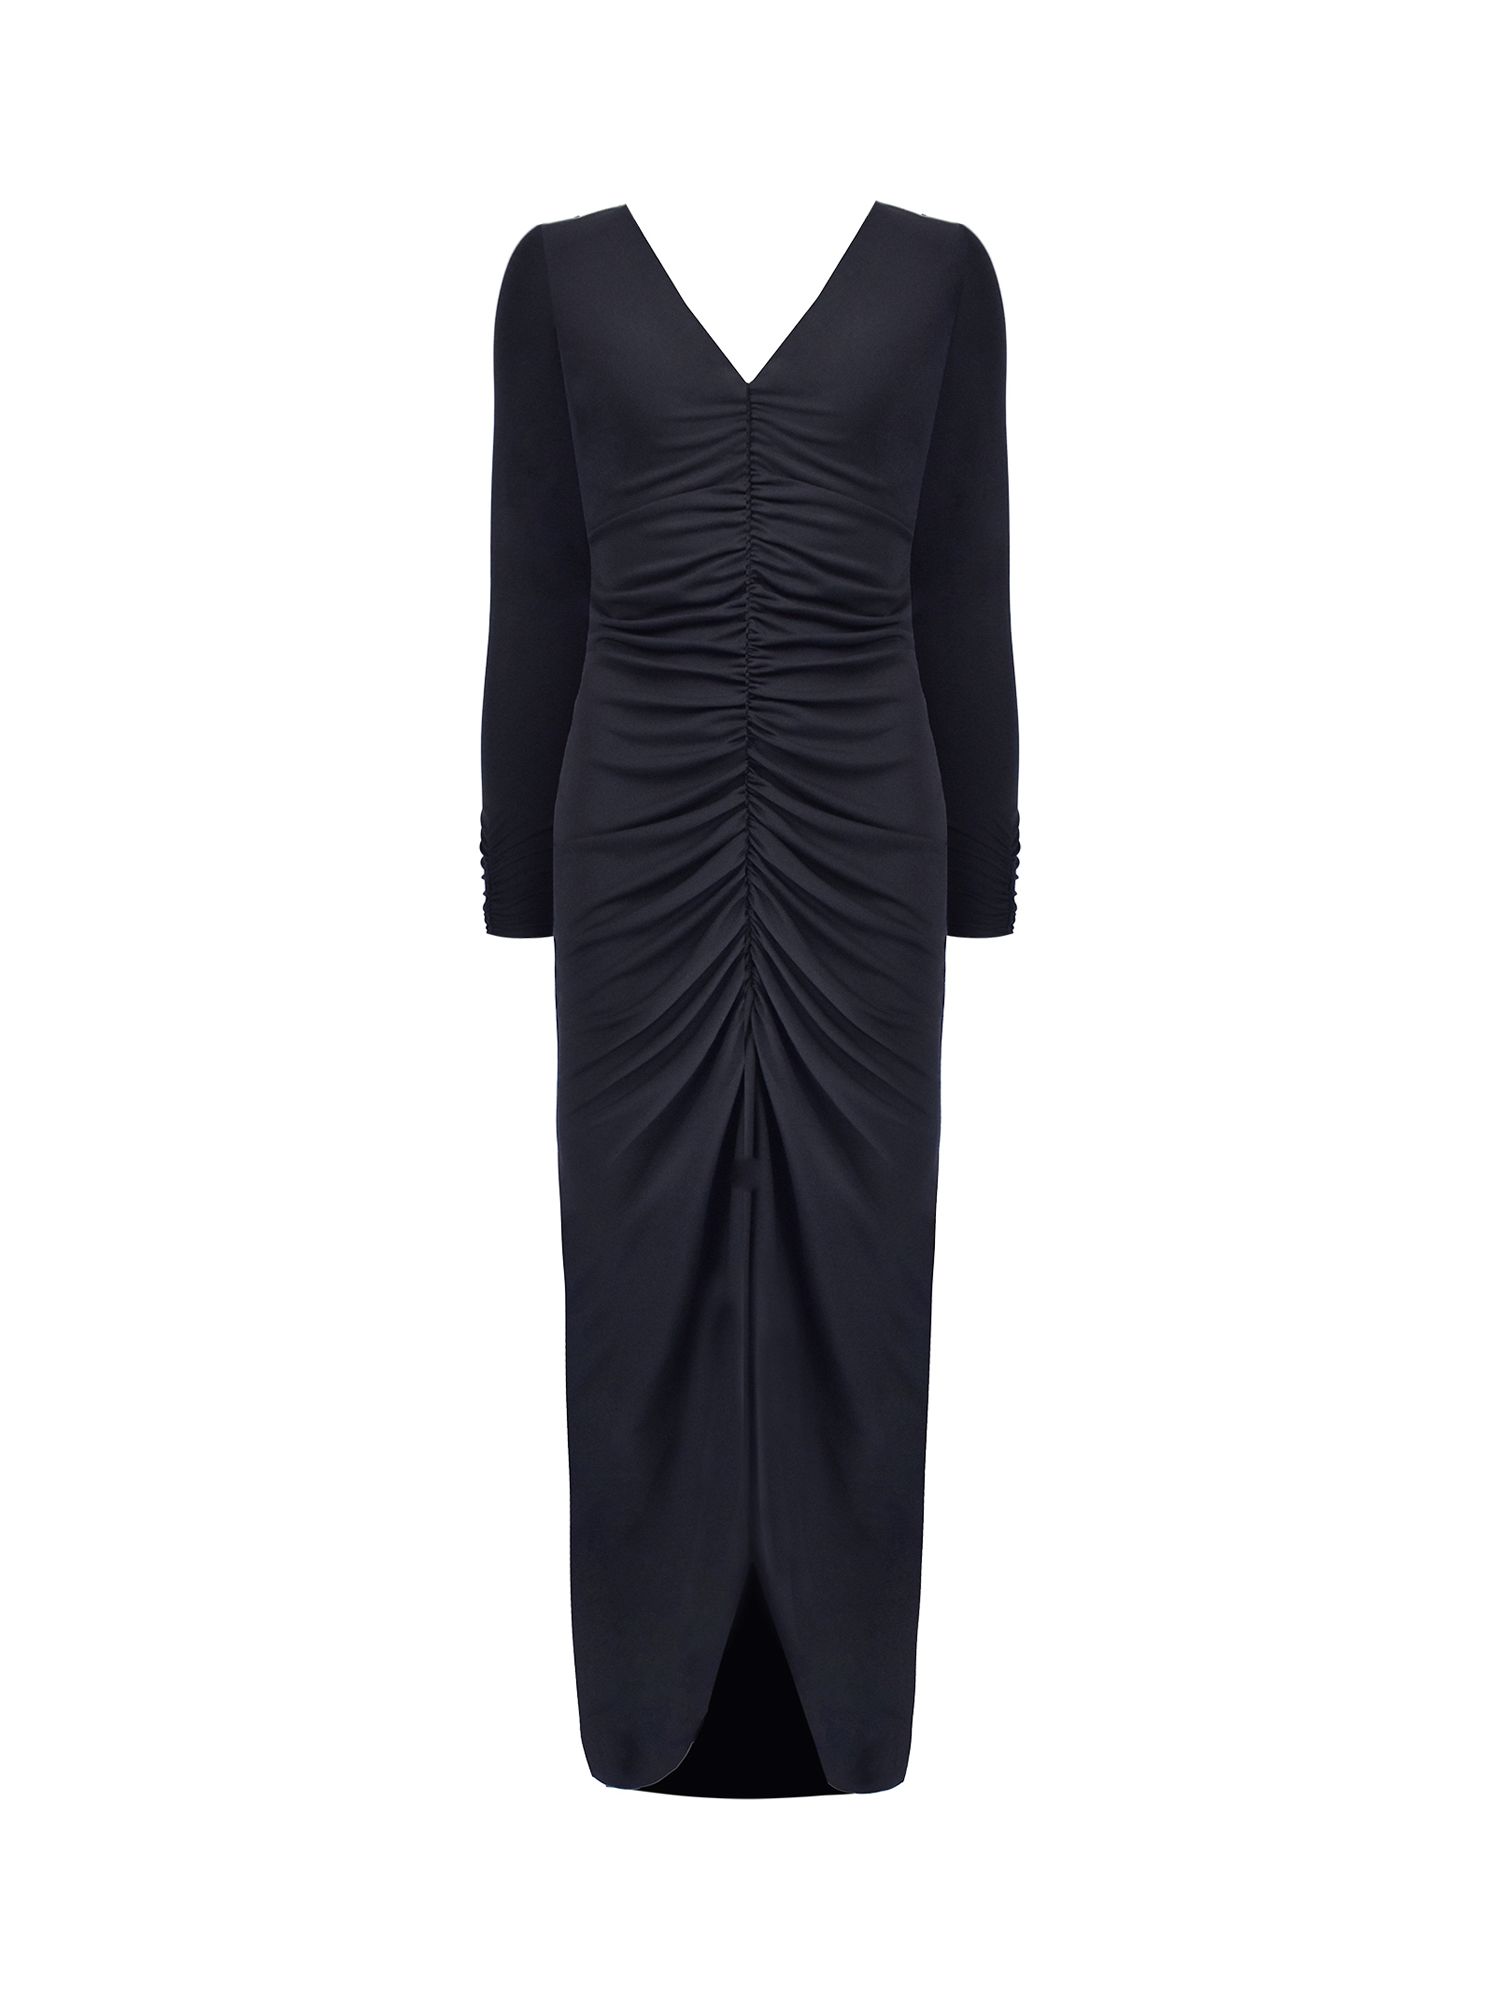 Ro&Zo Jersey Ruched Front Midi Dress, Black at John Lewis & Partners